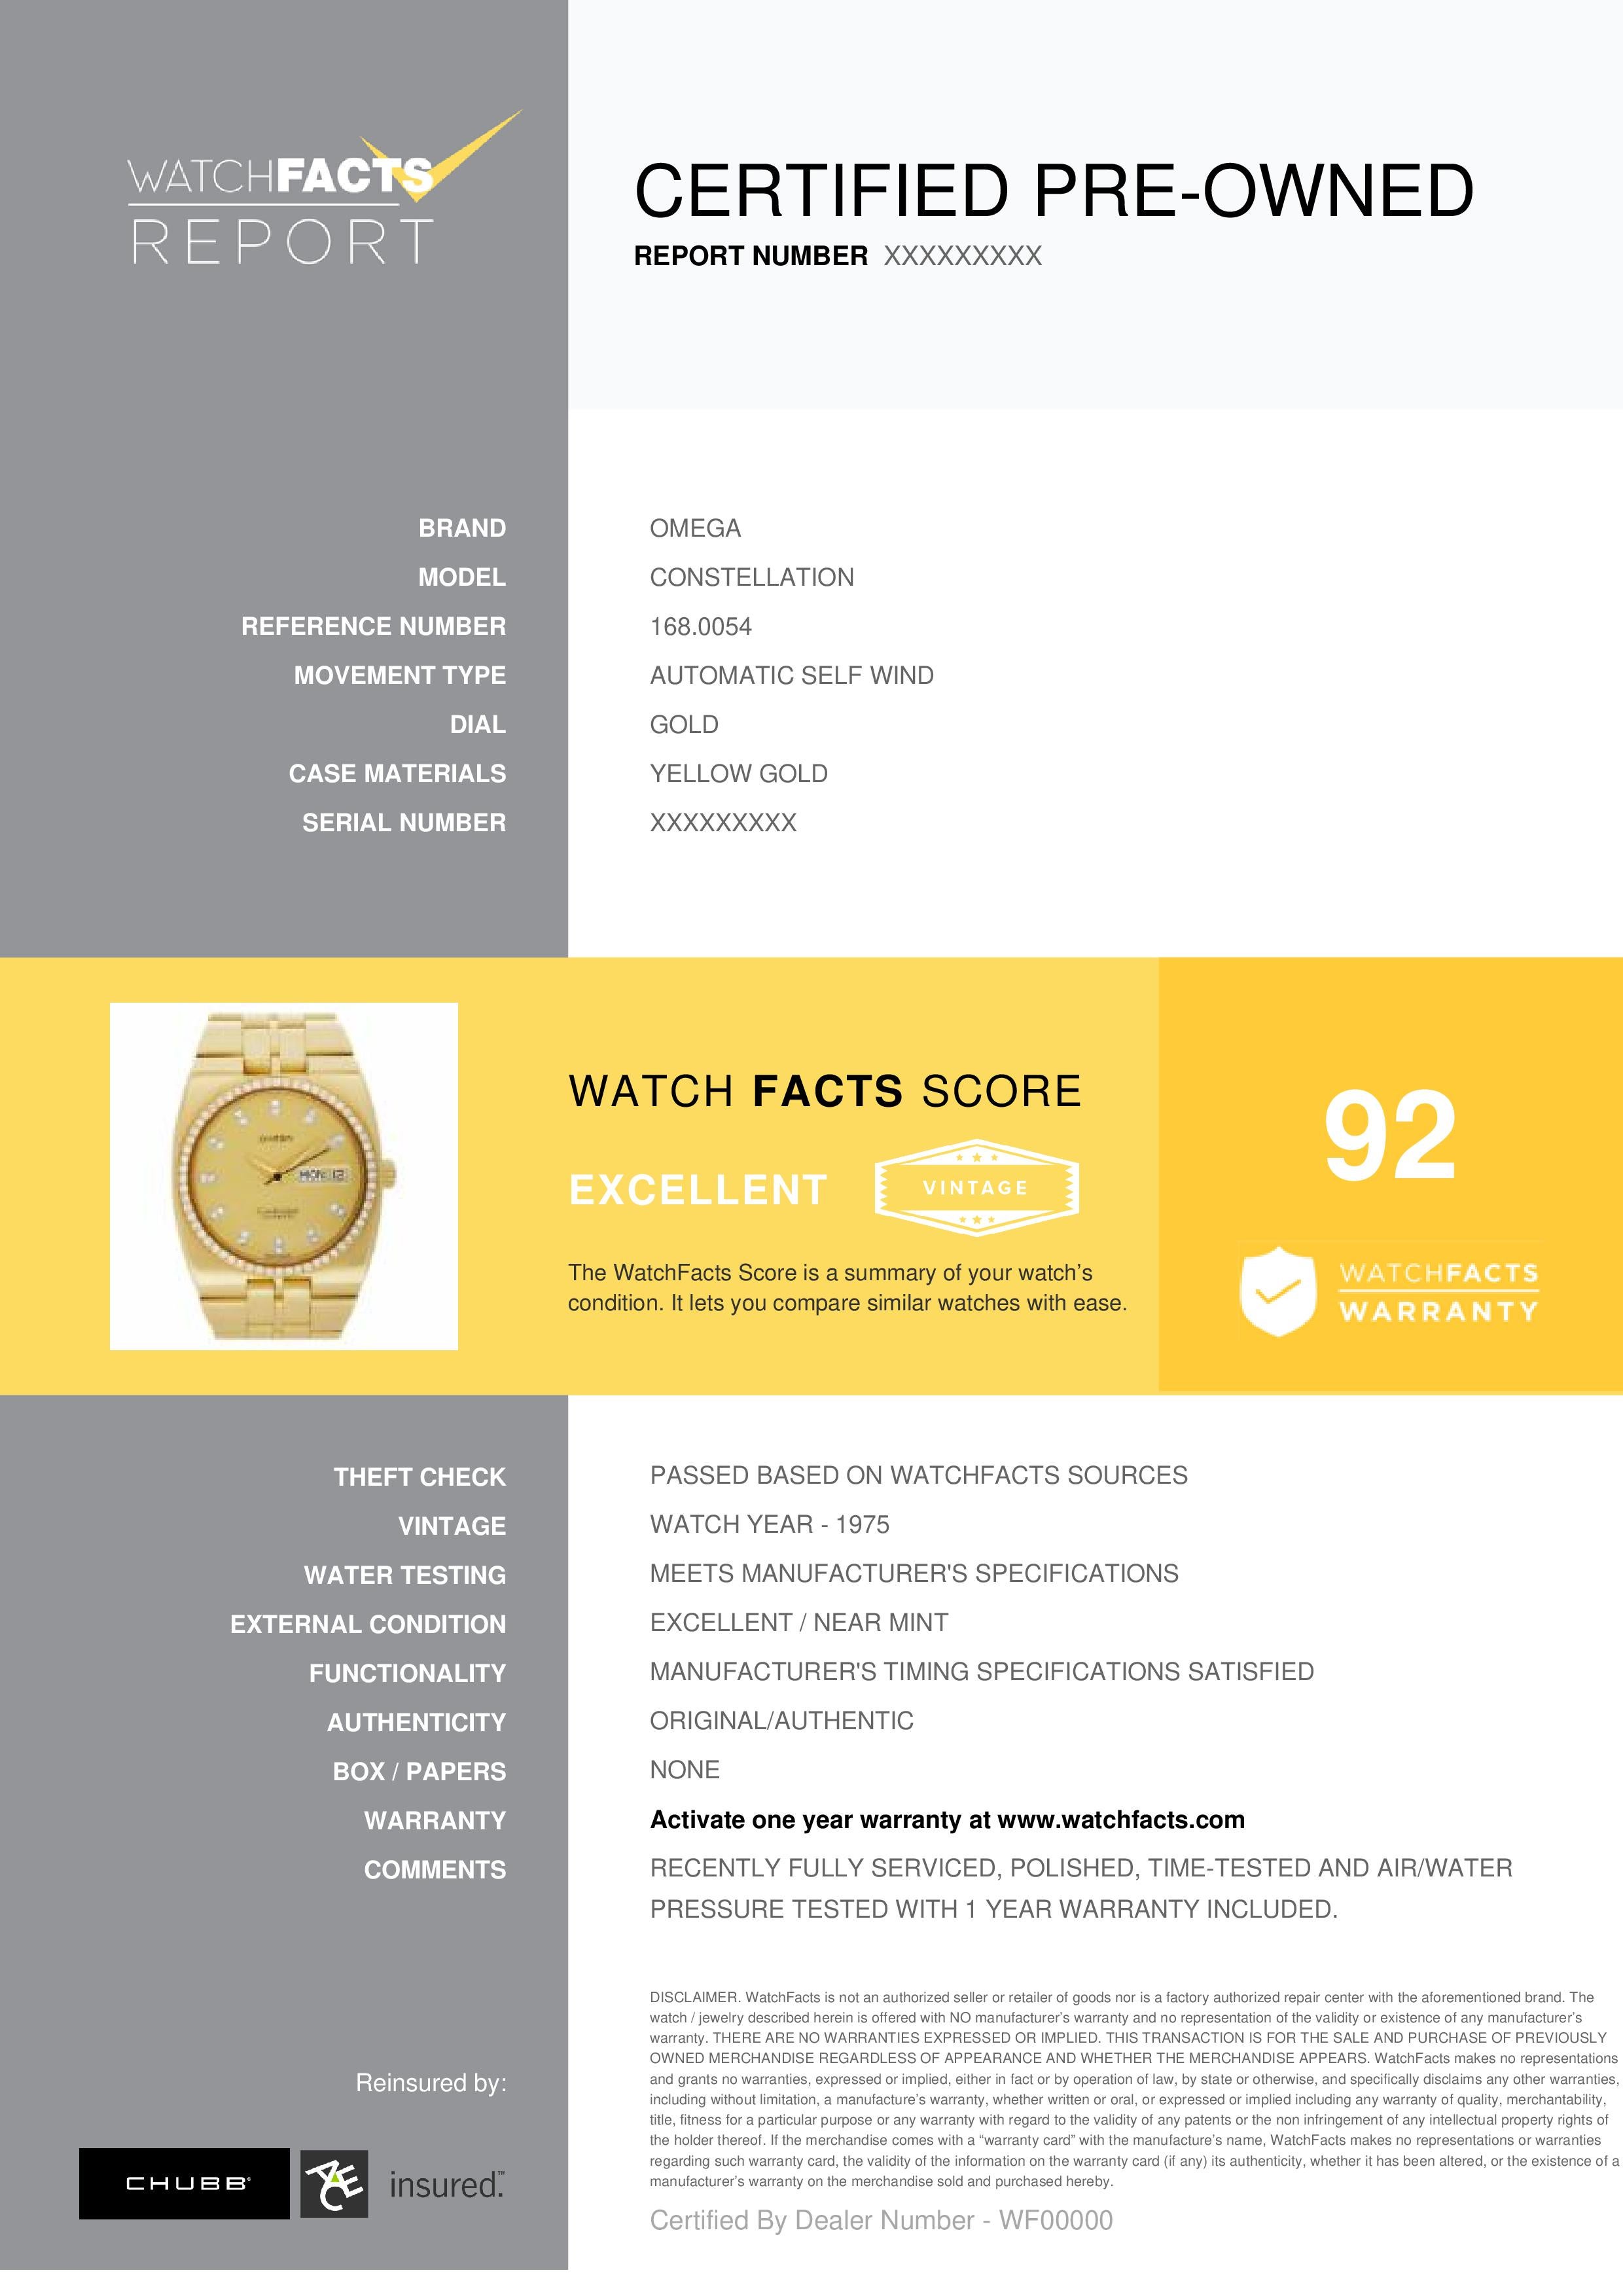 Omega Constellation Reference #: 1680054. Mens Automatic Self Wind Watch Yellow Gold Gold 40 MM. Verified and Certified by WatchFacts. 1 year warranty offered by WatchFacts.
